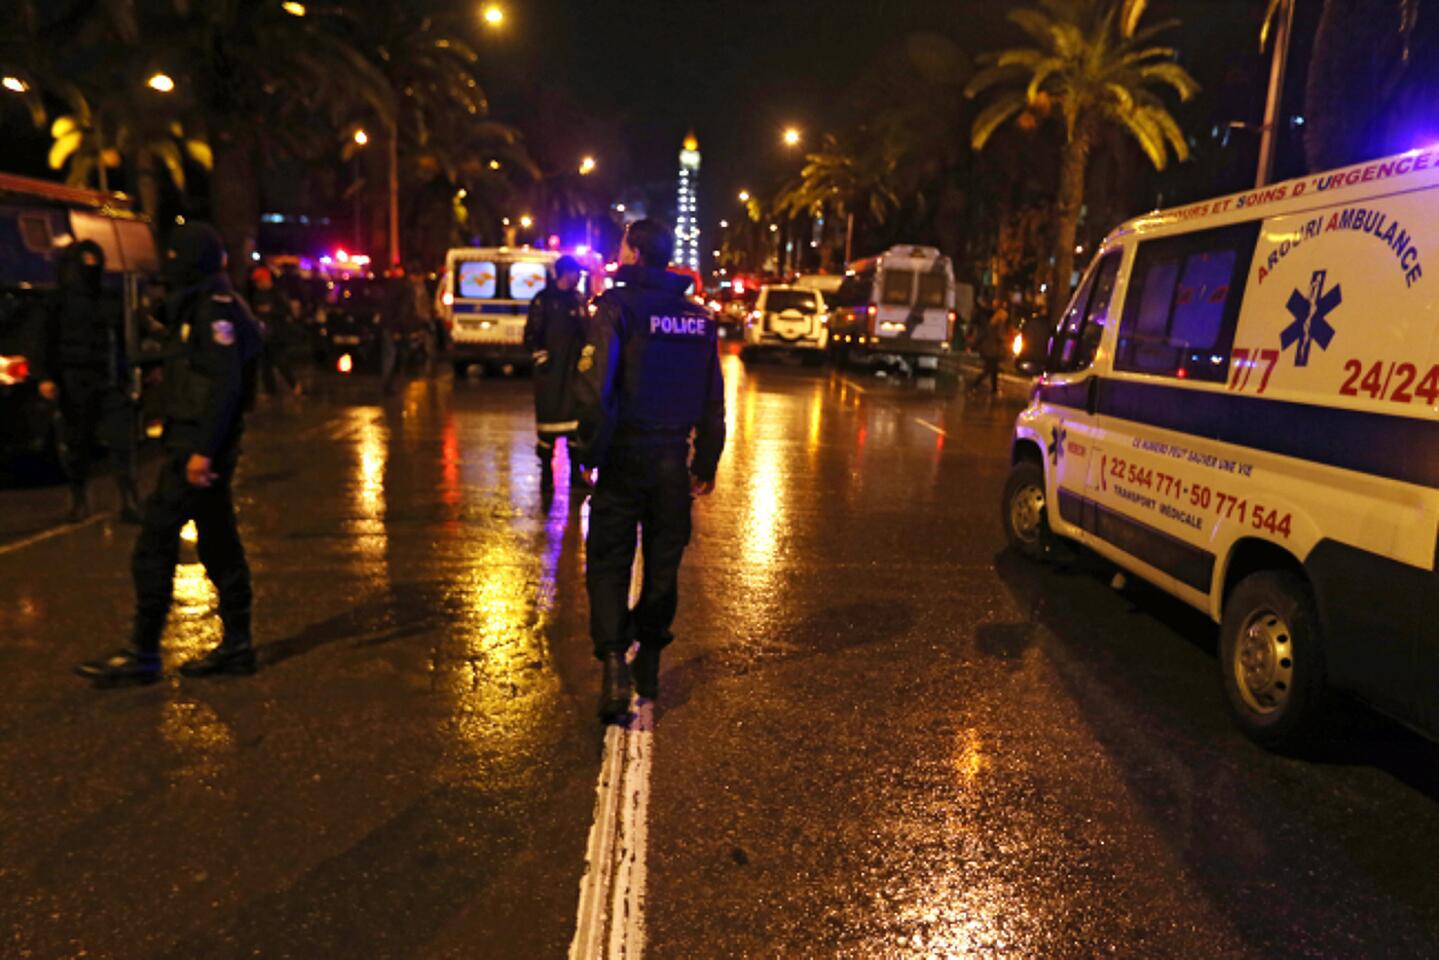 Police and rescue forces at the scene of an explosion in Tunis, Tunisia, on Nov. 24 2015.